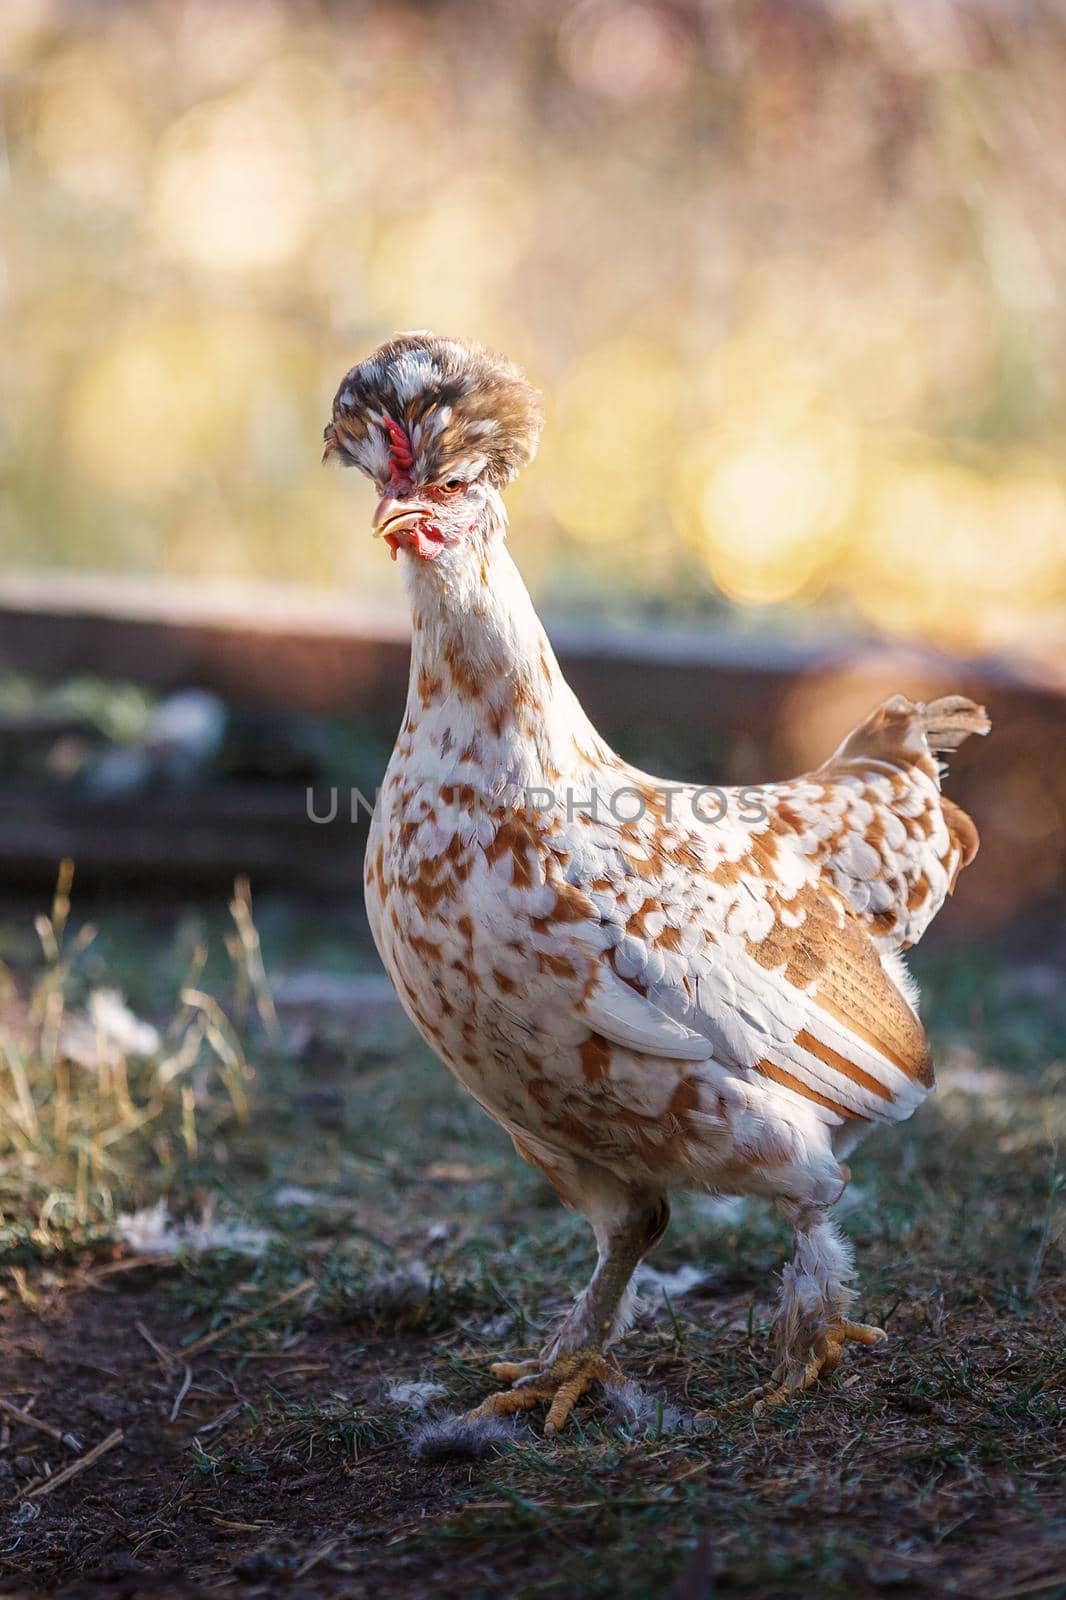 Poultry in a rural yard. Hen in a grass in the village against sun photos. Gallus gallus domesticus. Poultry organic farm. Organic farming. by Lincikas